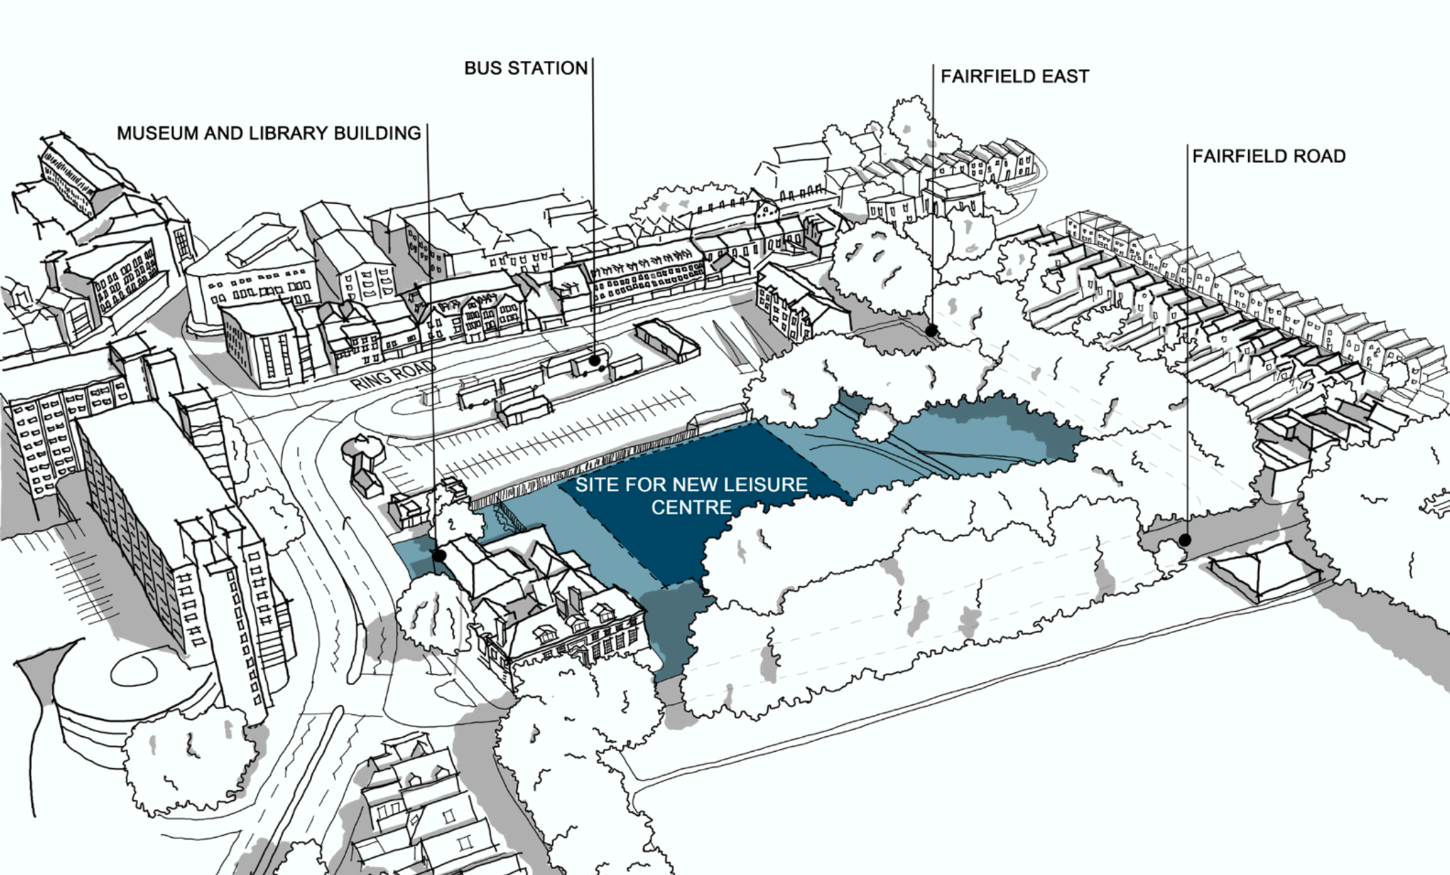 Image showing the location of the future leisure centre, at the old Kingfisher leisure centre site. Image is a map with a dark blue shaded area for the site.